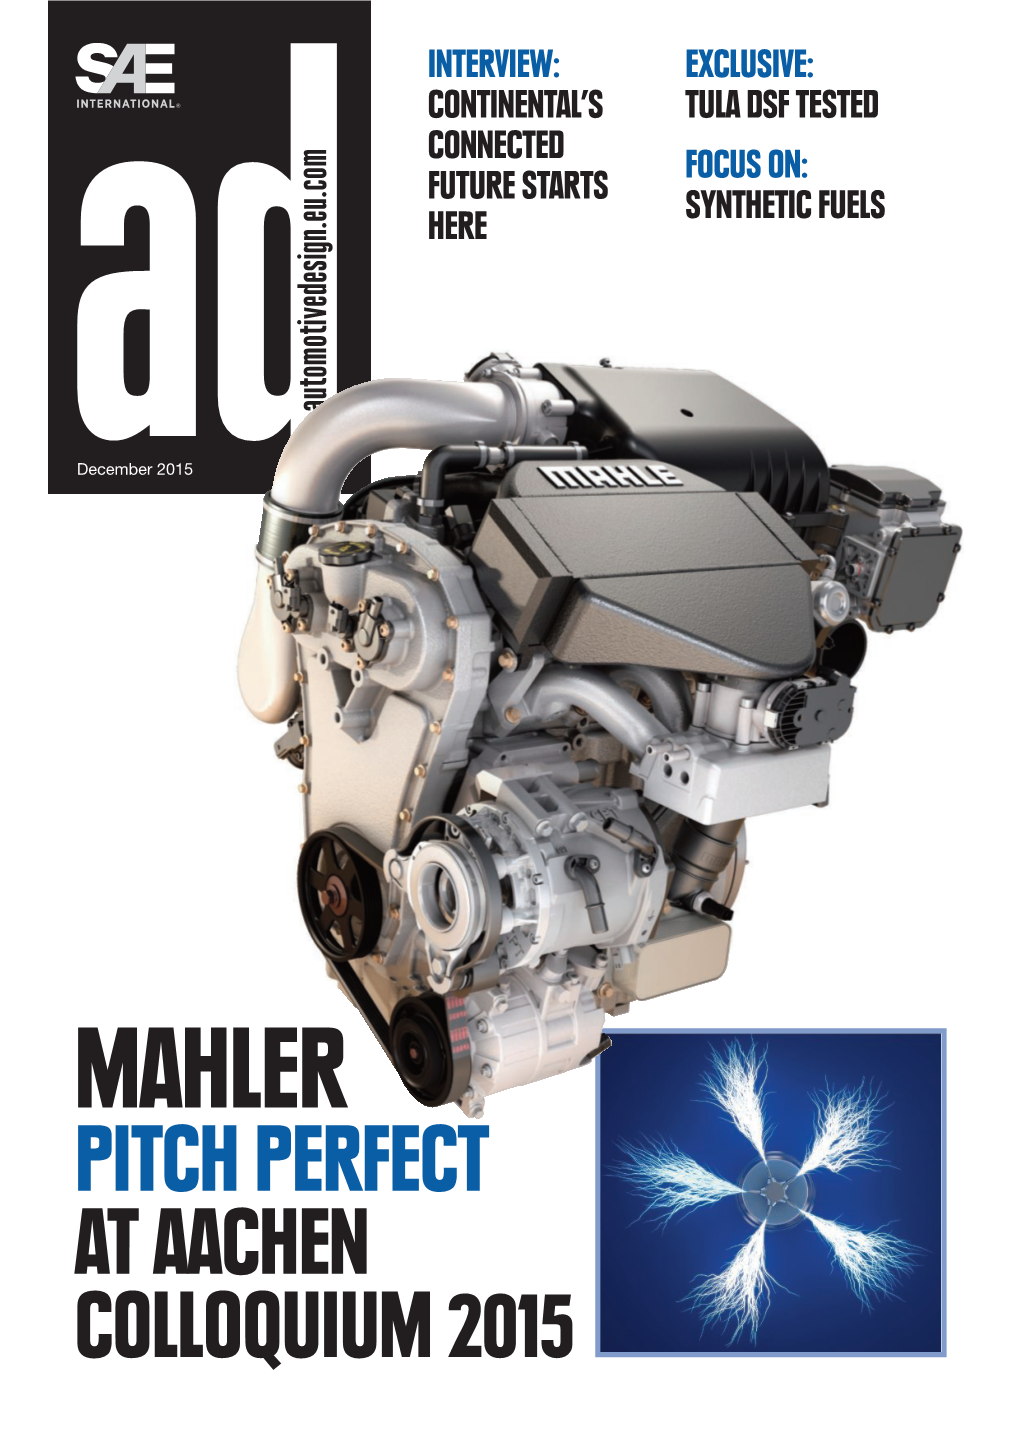 Mahler Pitch Perfect at Aachen Colloquium 2015